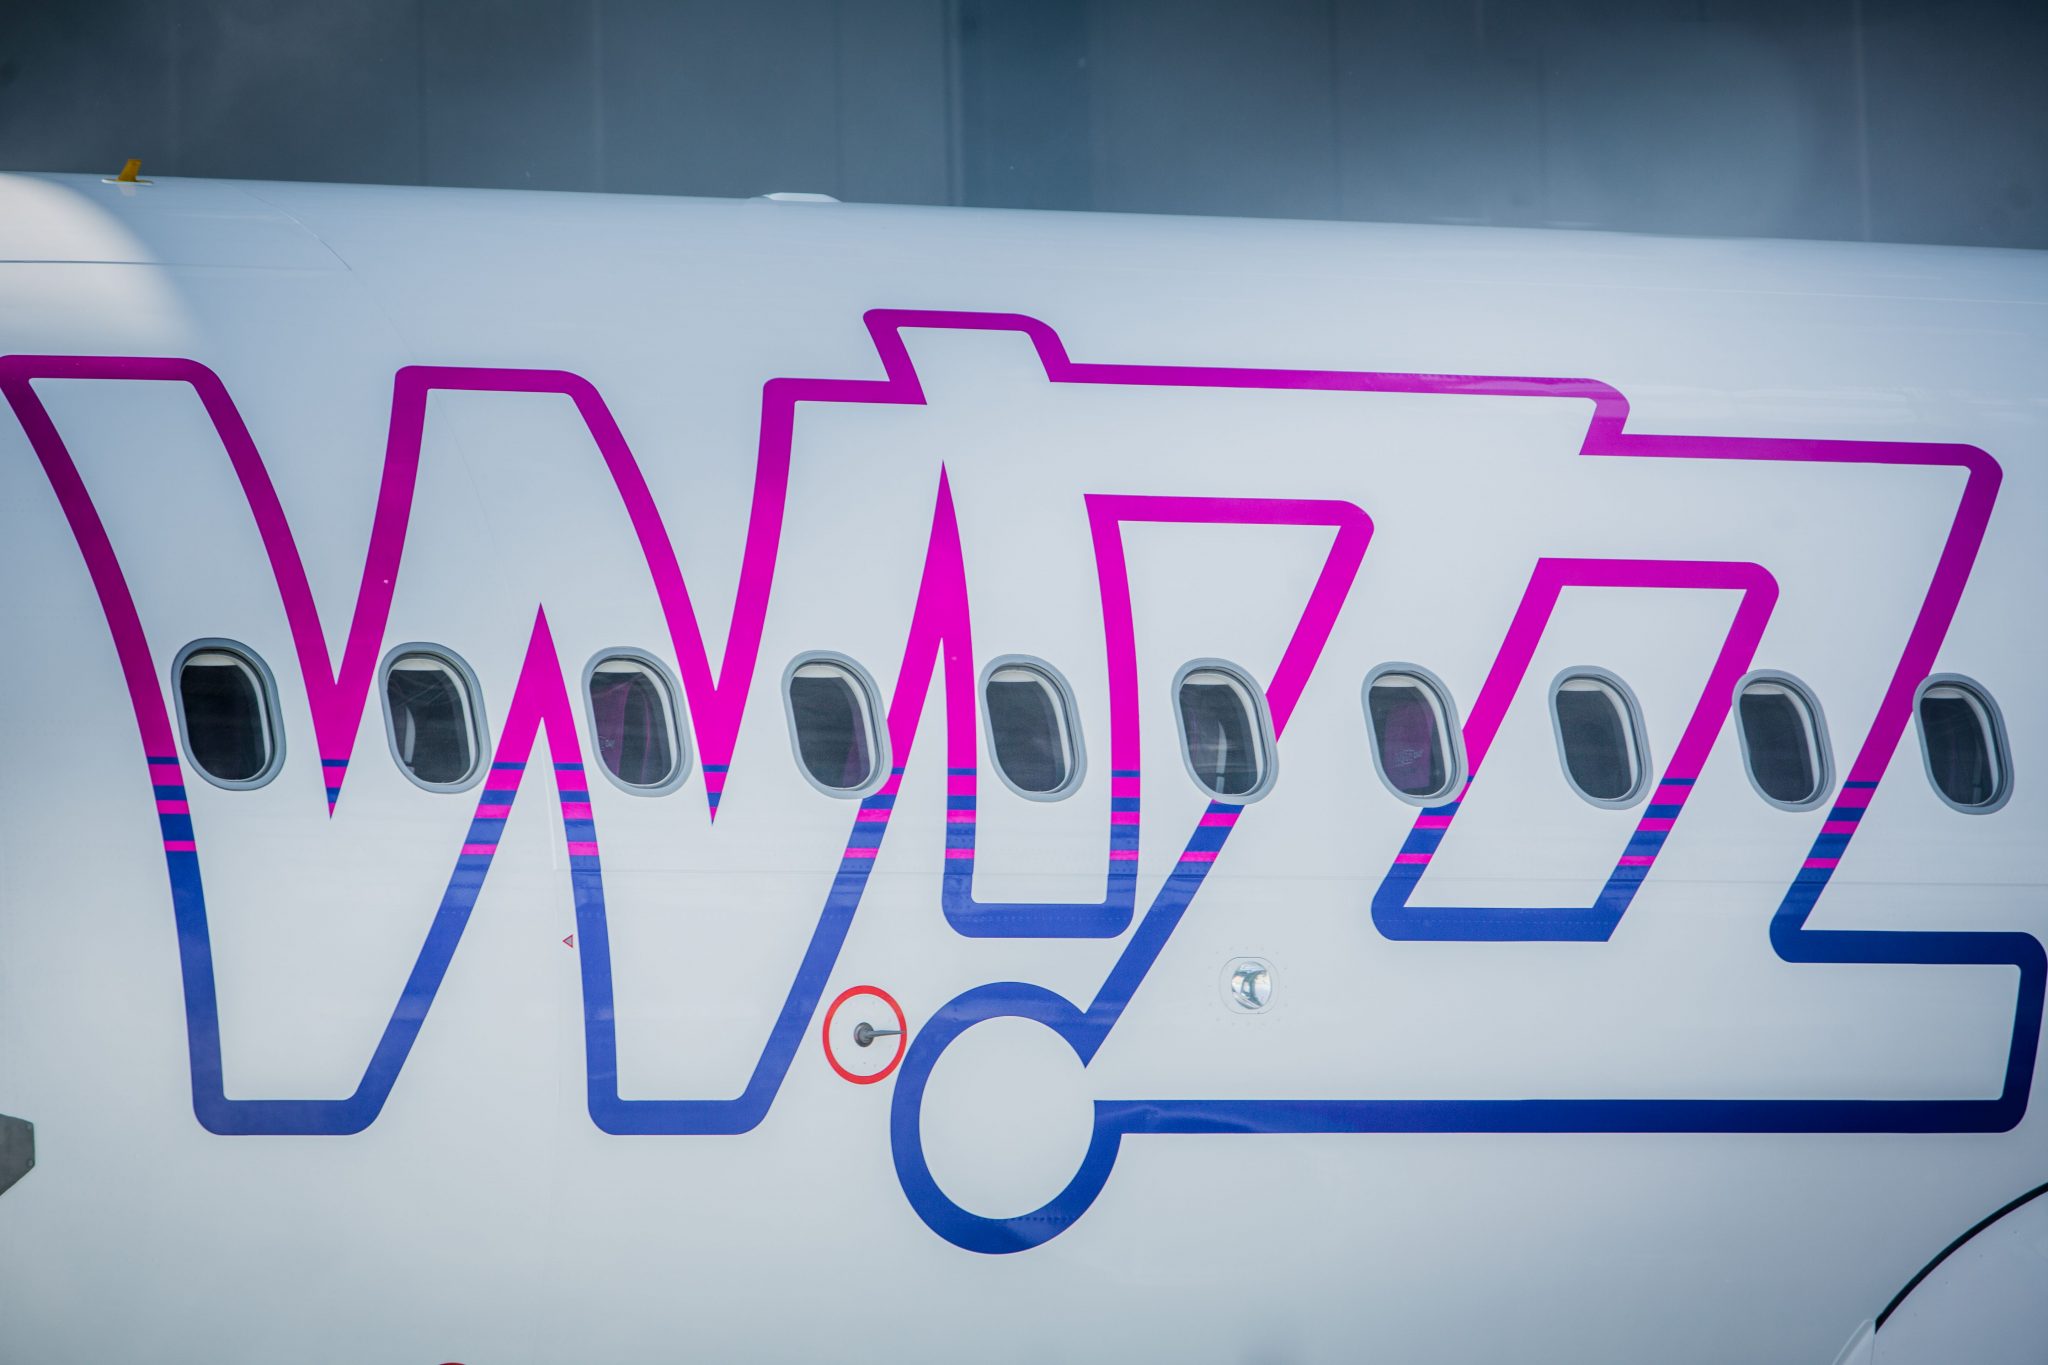 Wizz Air Oct capacity reduced to 50%